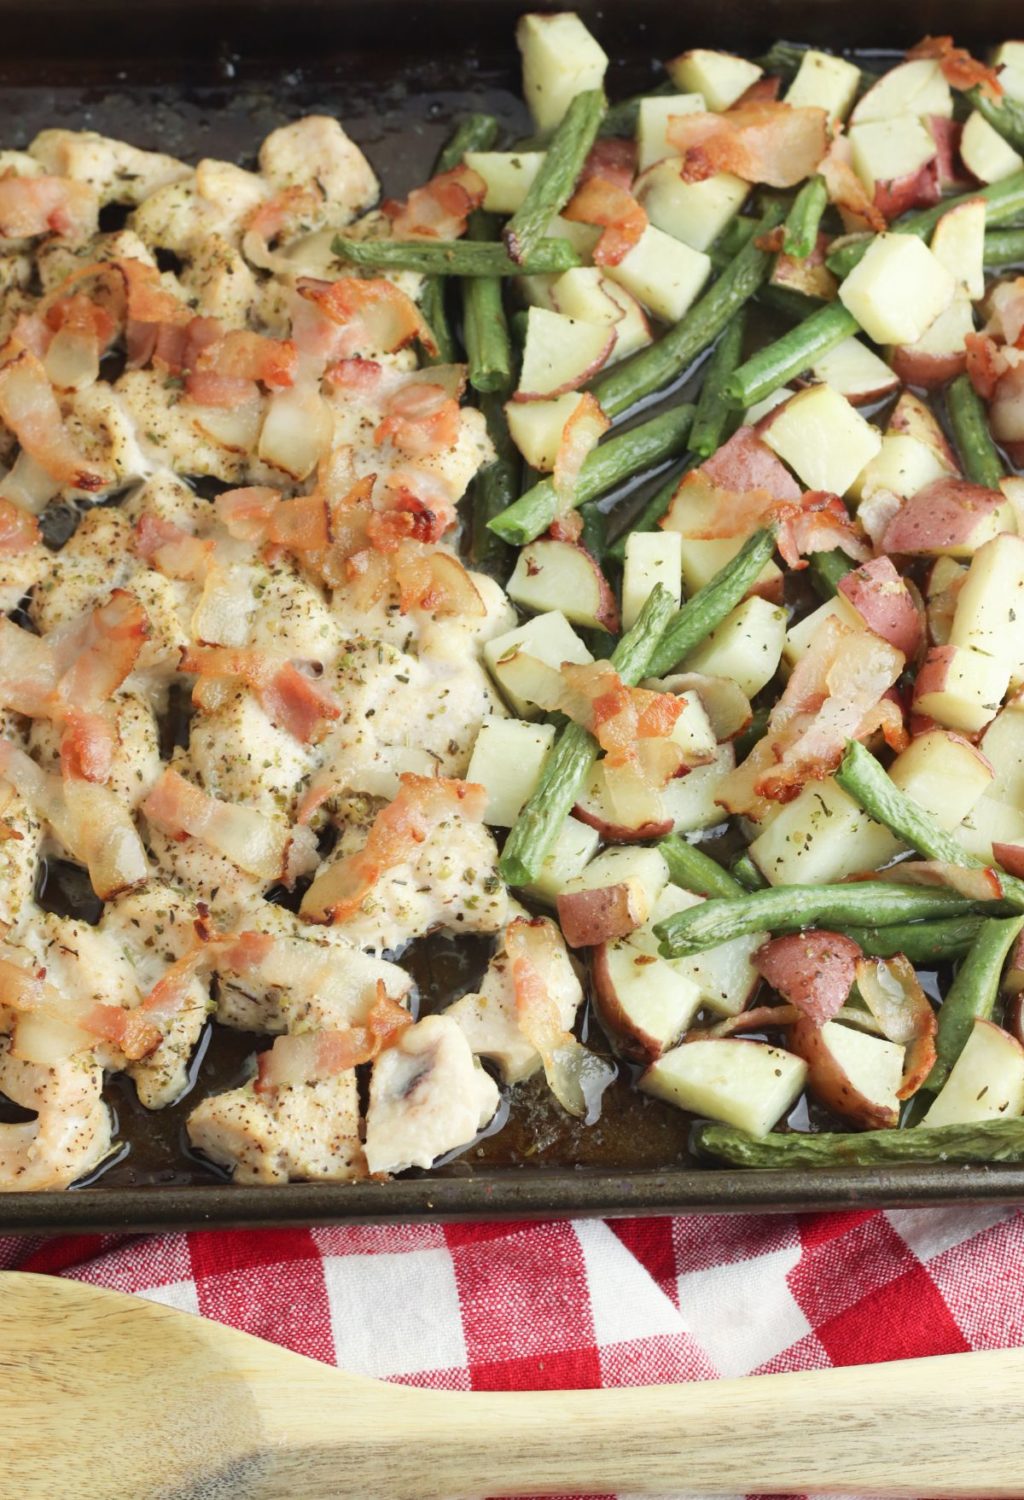 Chicken and green beans on a baking sheet.